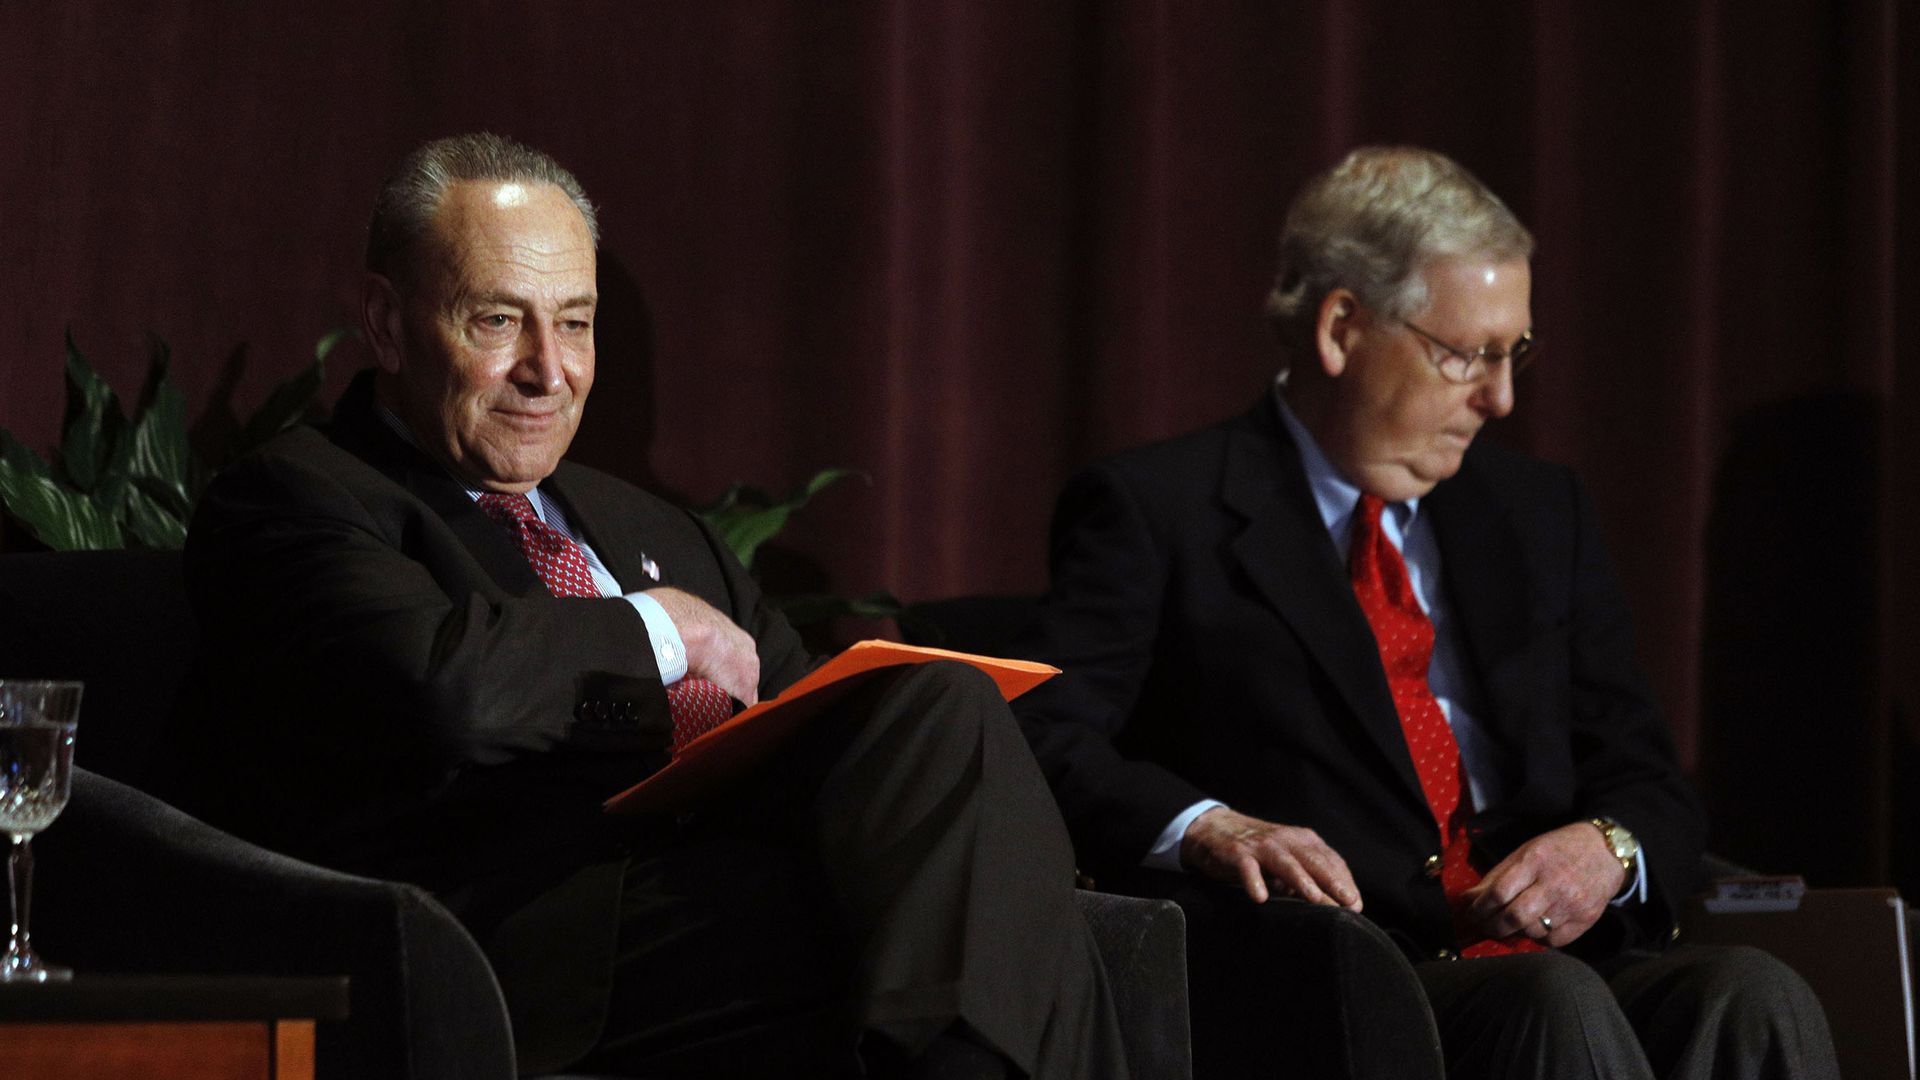 Chuck Schumer and Mitch McConnell